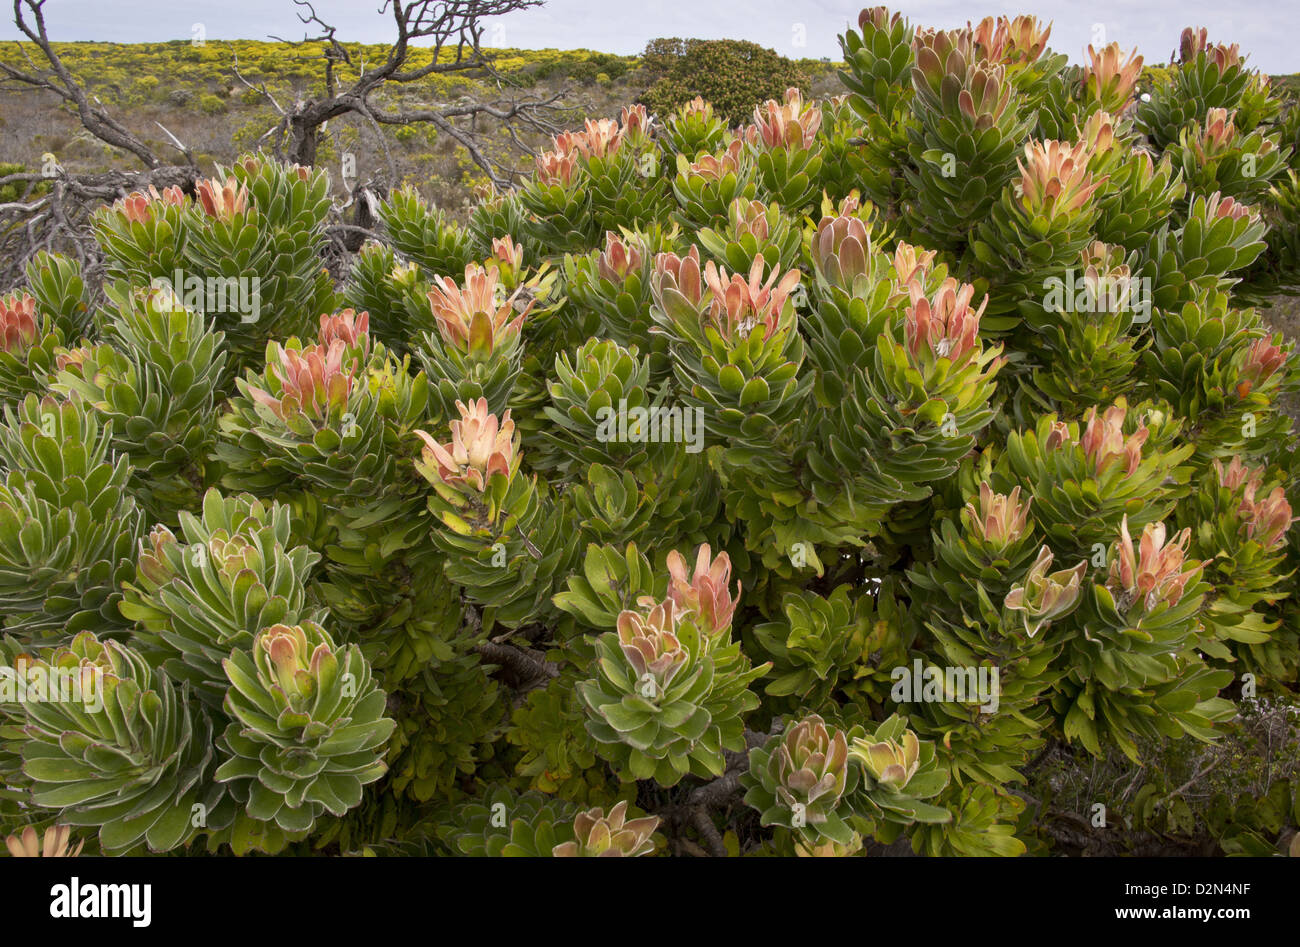 Common mimetes (Mimetes cucullata) in flower, Table Mountain National Park, South Africa. Stock Photo